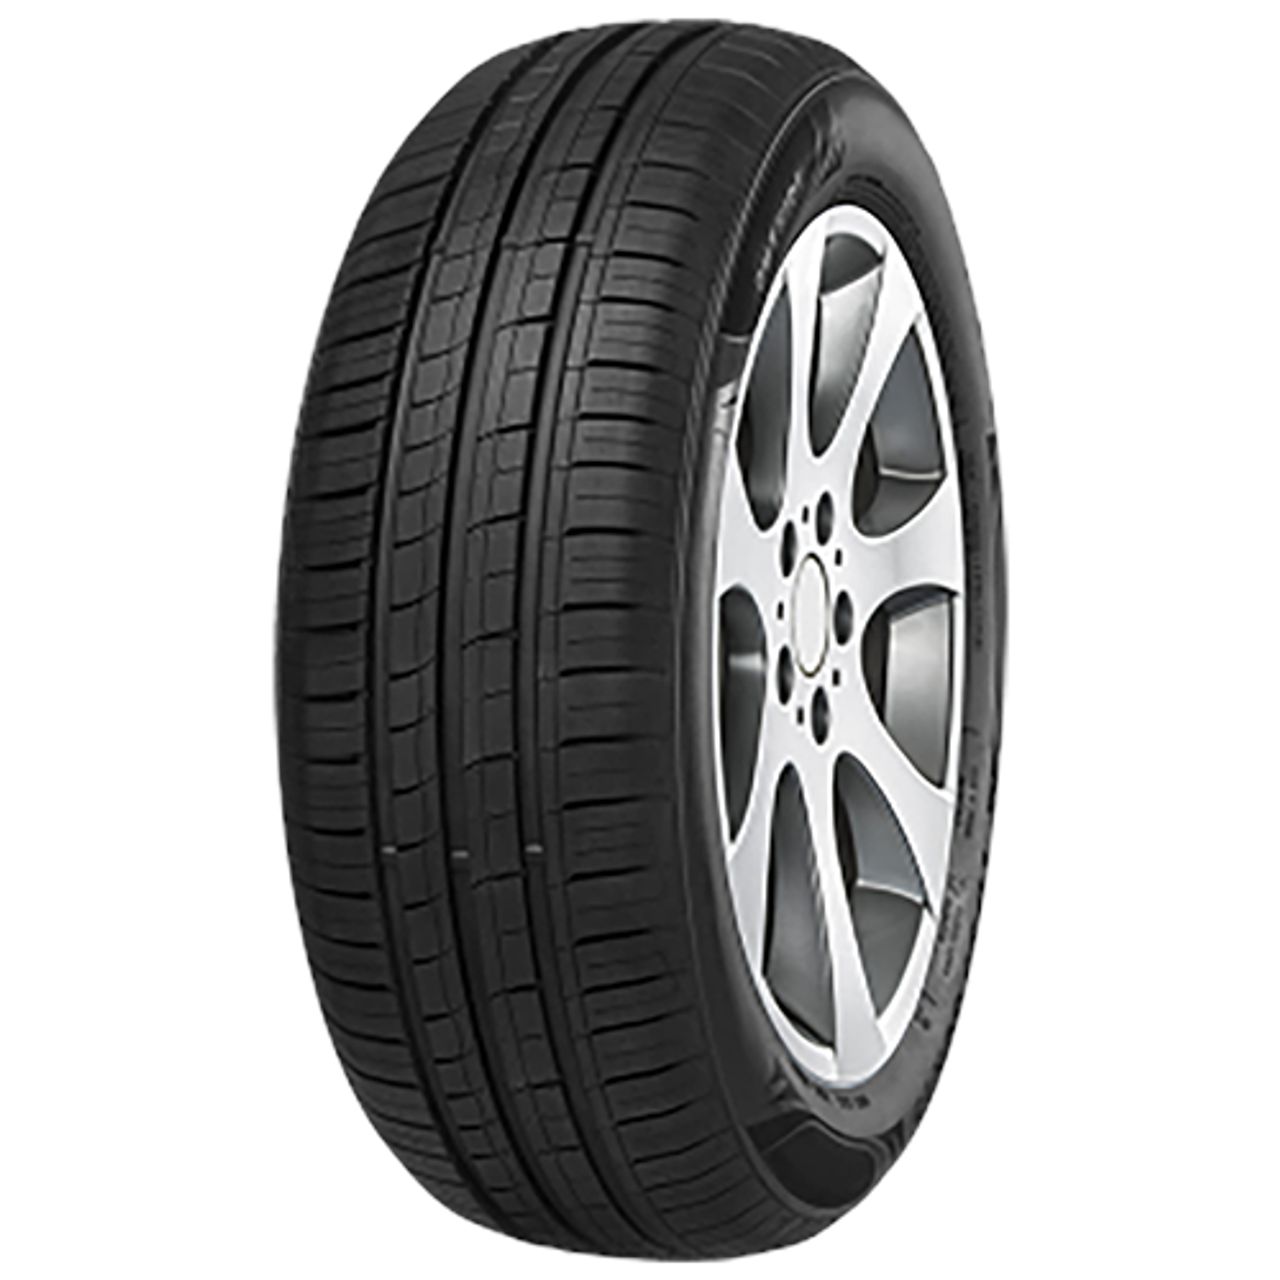 IMPERIAL ECODRIVER 4 155/80R12 77T BSW